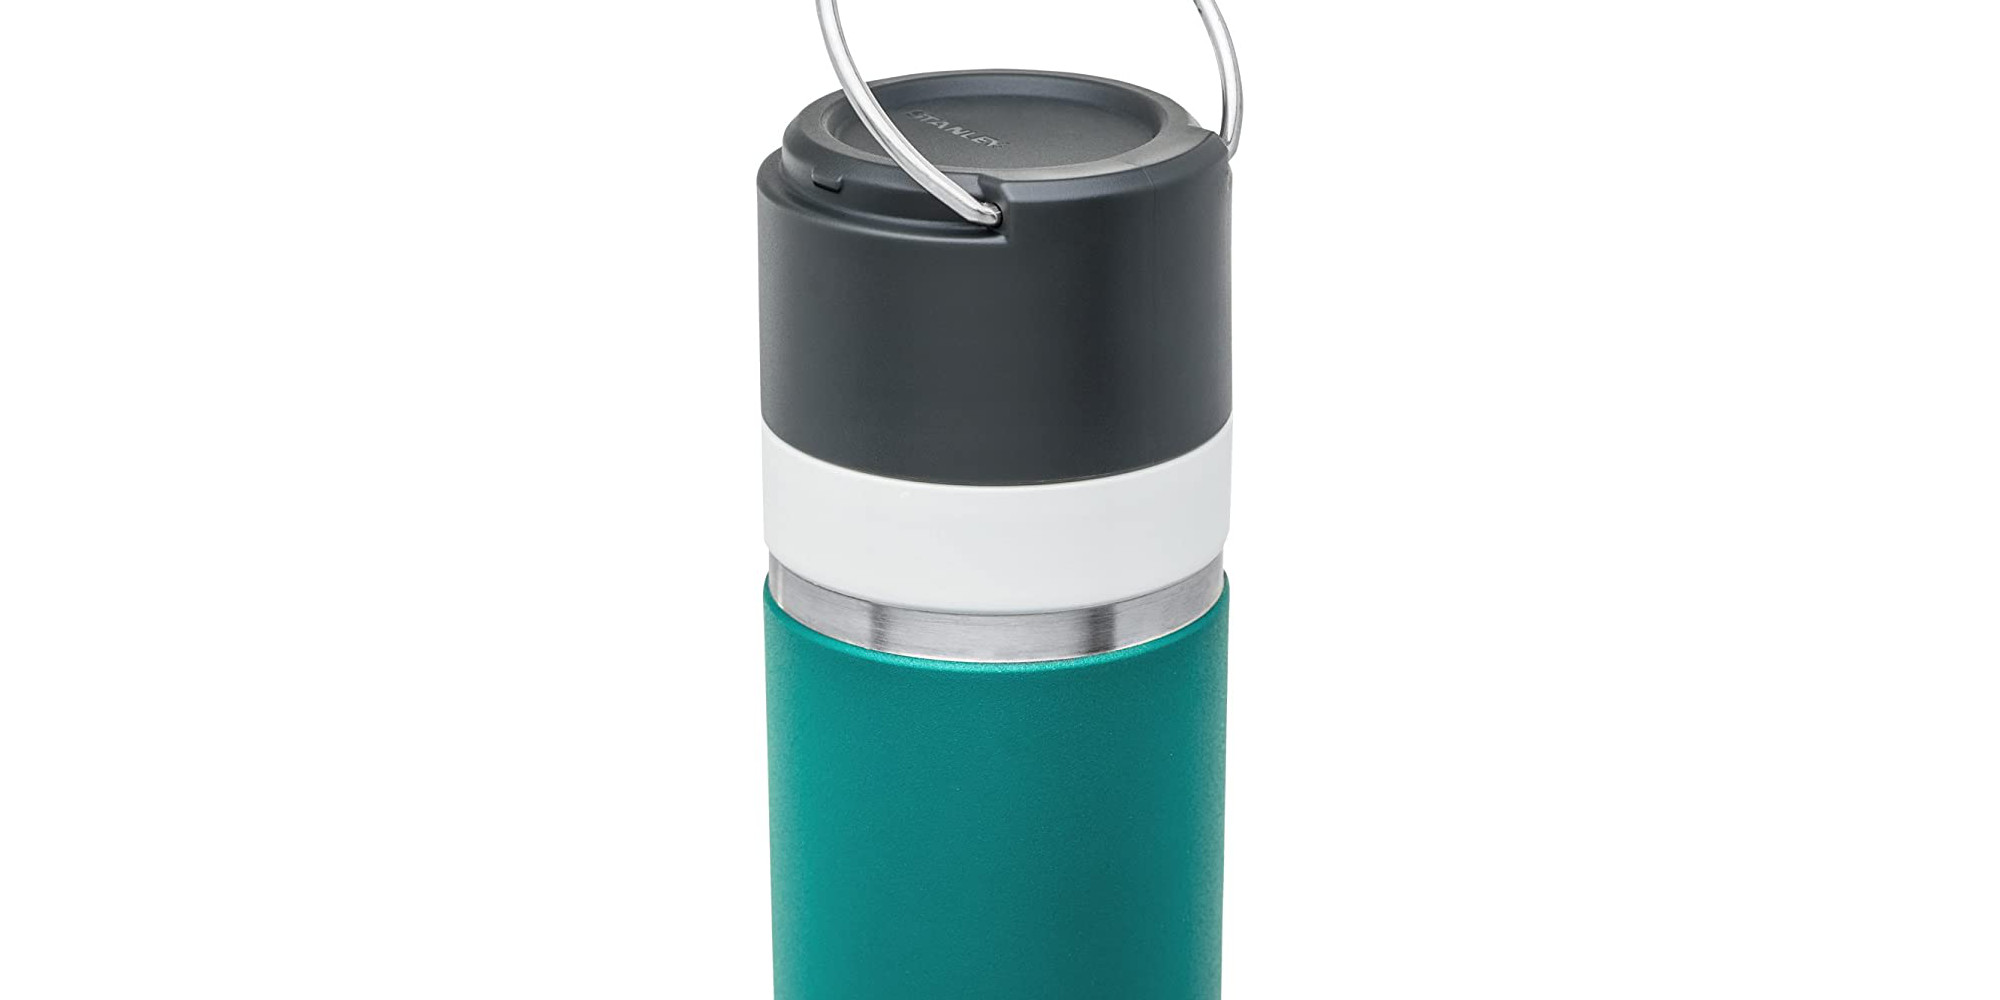 Stanley's Go Series Ceramivac insulated bottles hit the  low at $11.50